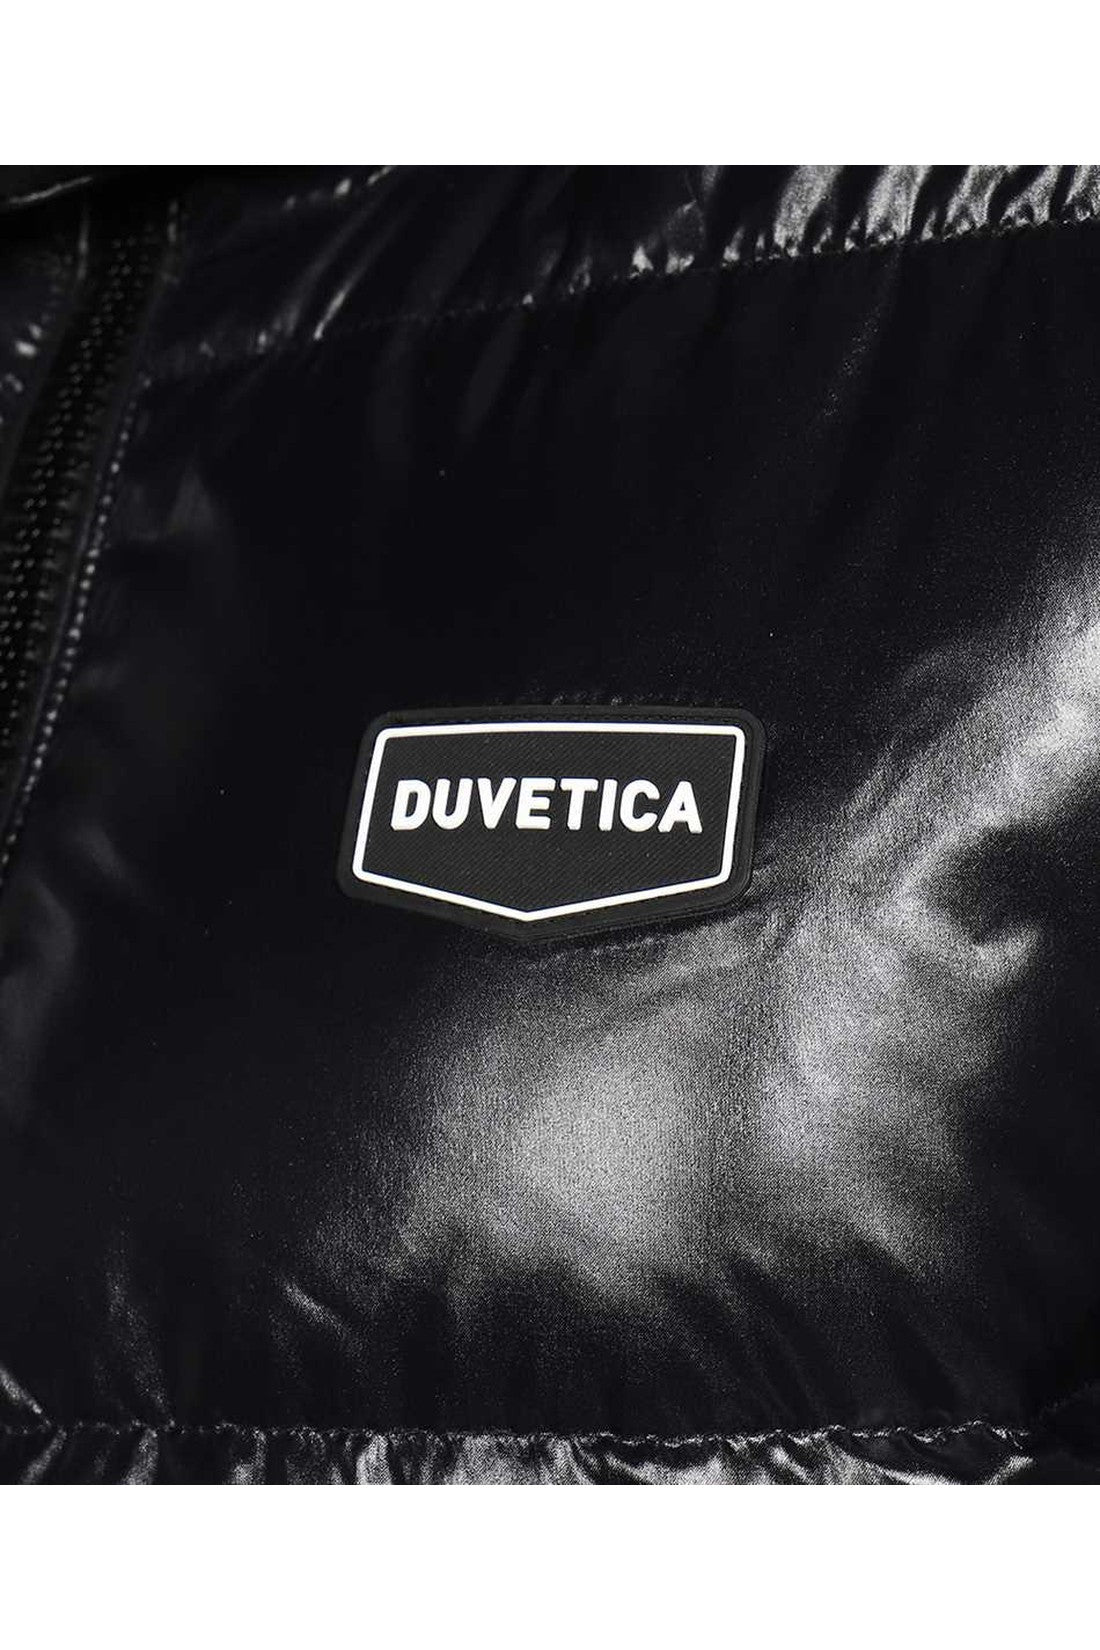 Duvetica-OUTLET-SALE-Hooded-full-zip-down-jacket-Jacken-Mantel-ARCHIVE-COLLECTION-3_2881a39c-4863-42cc-8ae1-3a0d6be1e92e.jpg